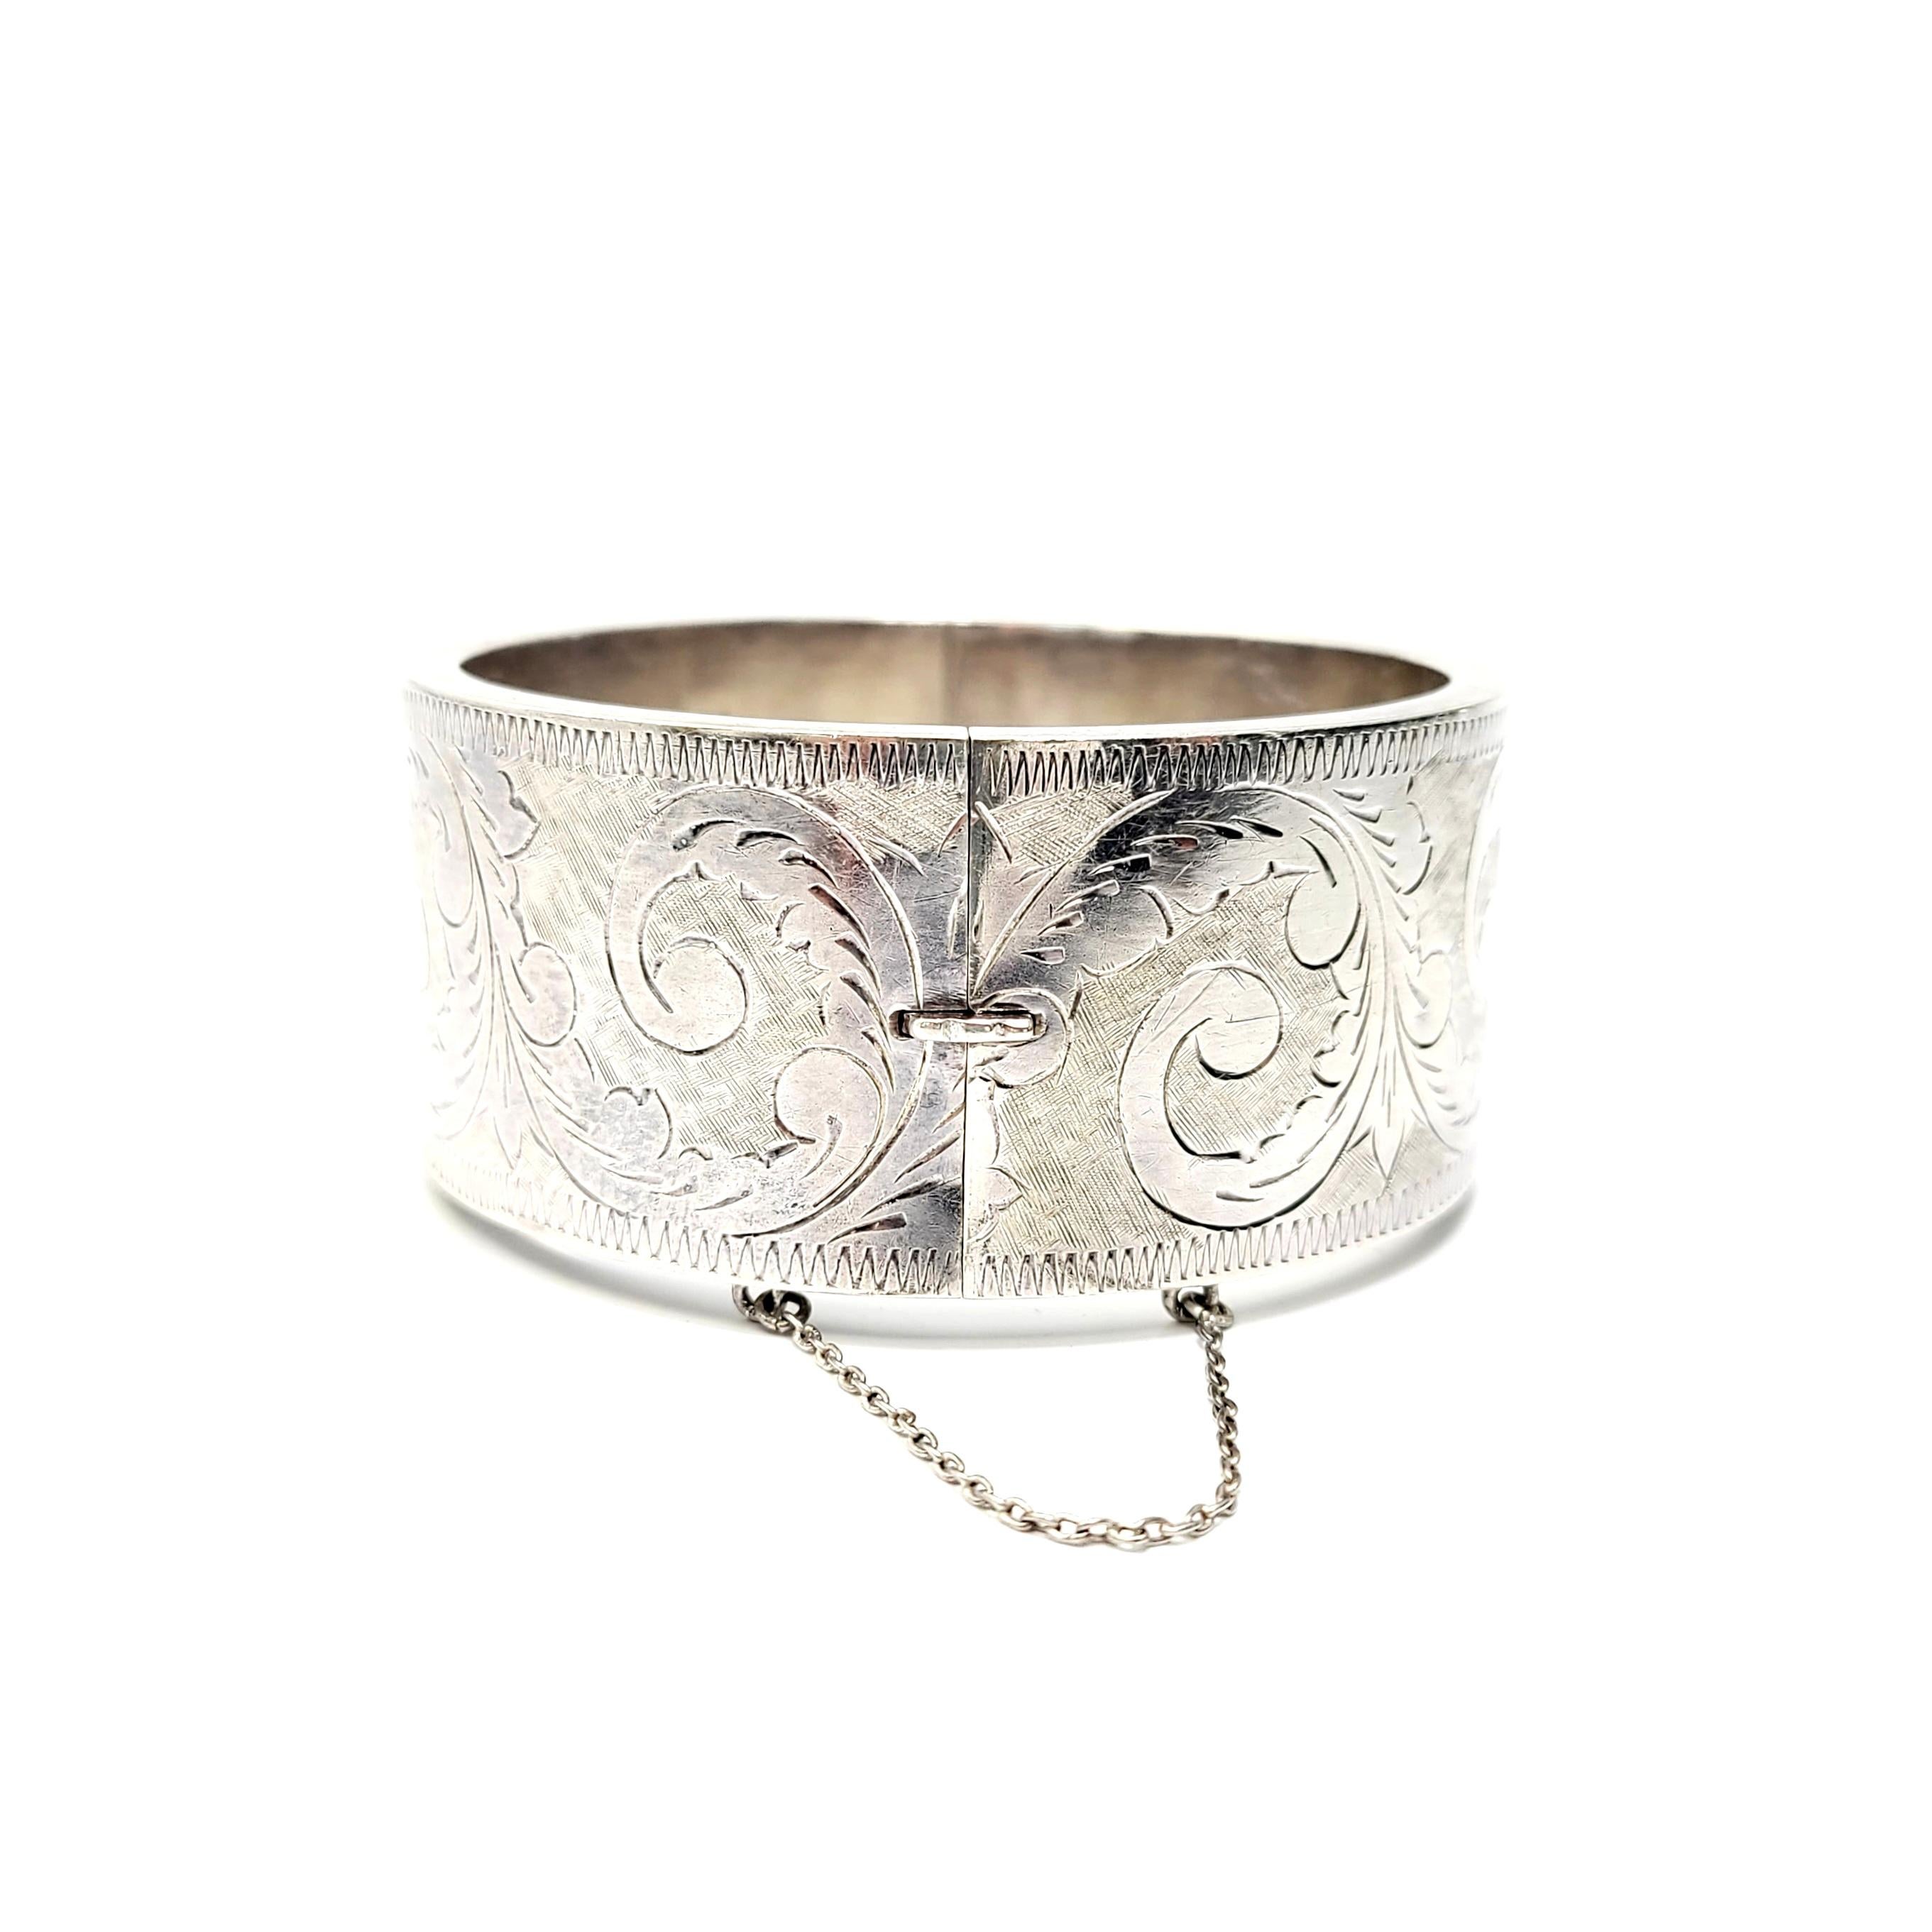 Antique sterling silver etched bangle bracelet.

Beautifully etched swirl and berry design all around the bracelet.

Measures approx 1 3/16